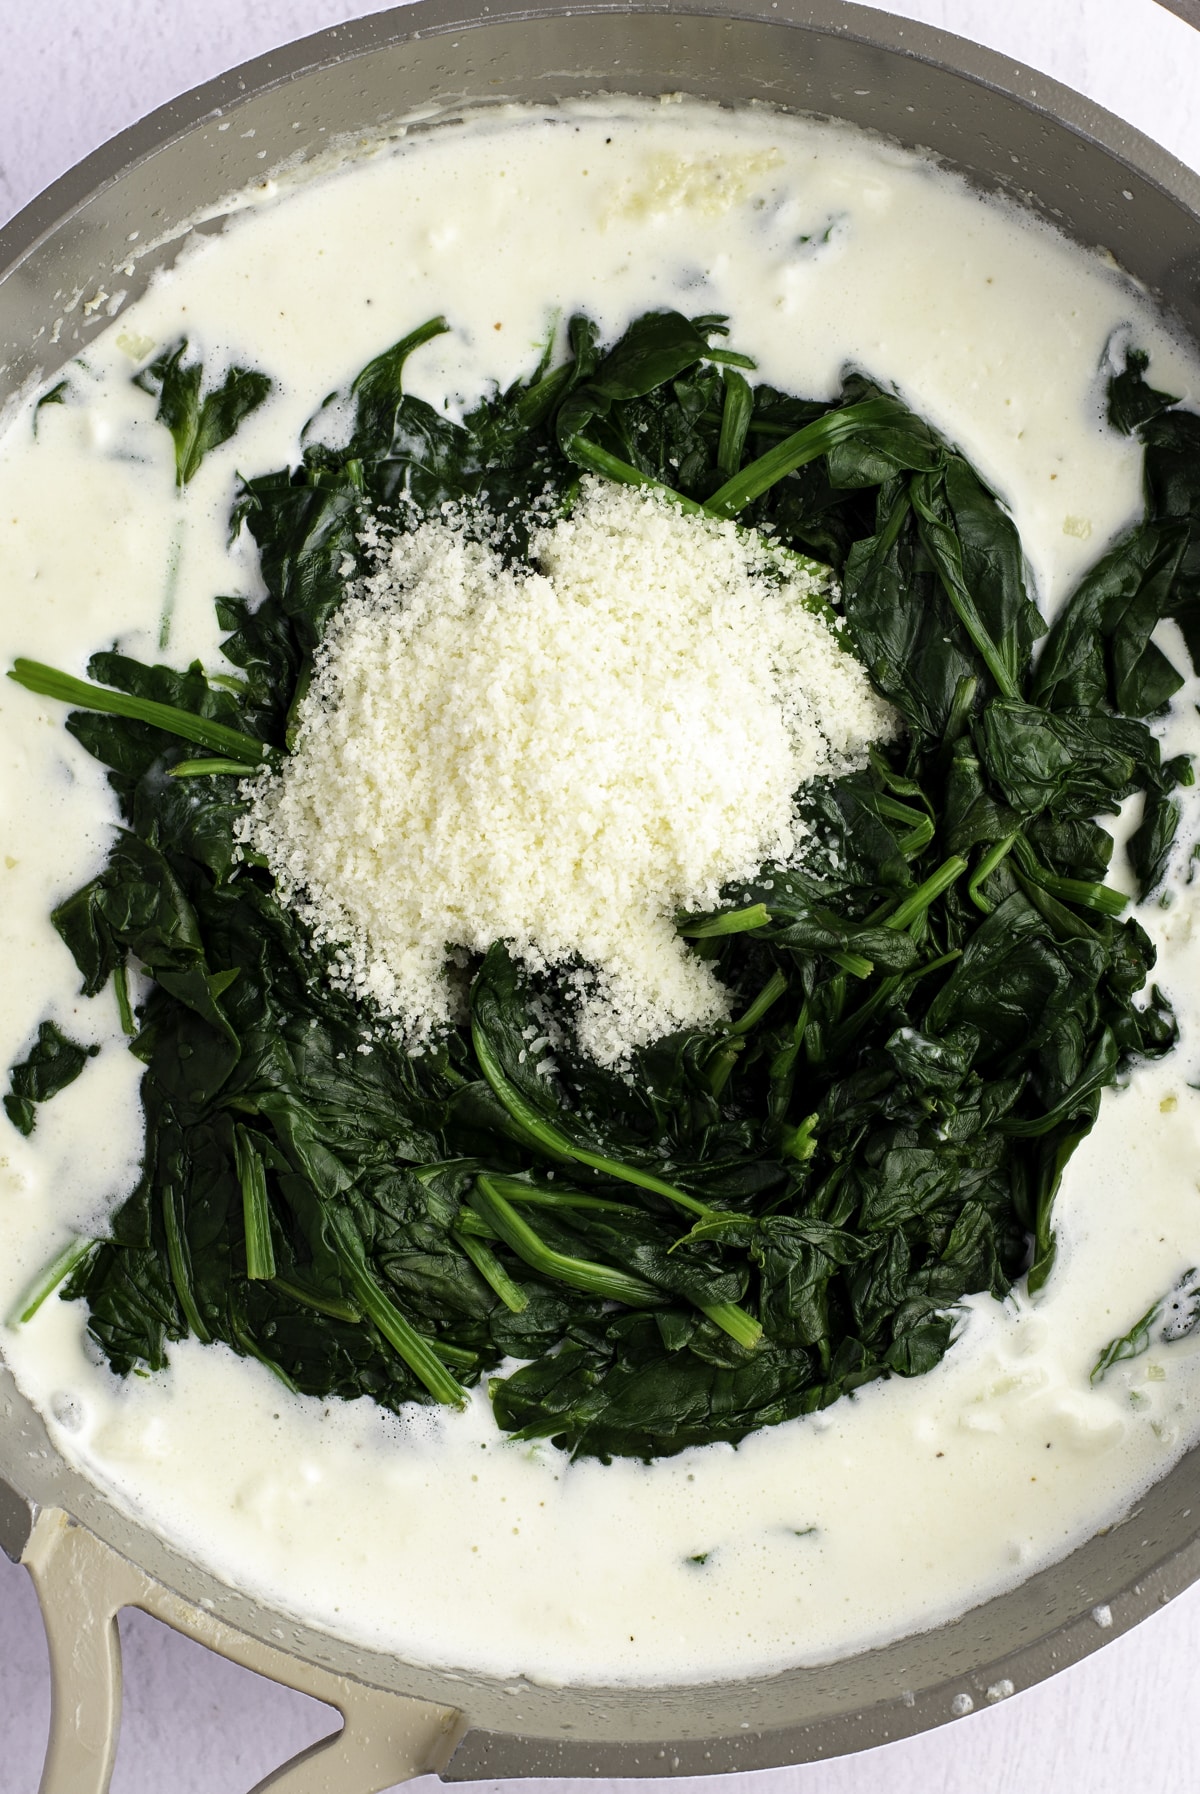 Spinach and parmesan added to the cream.